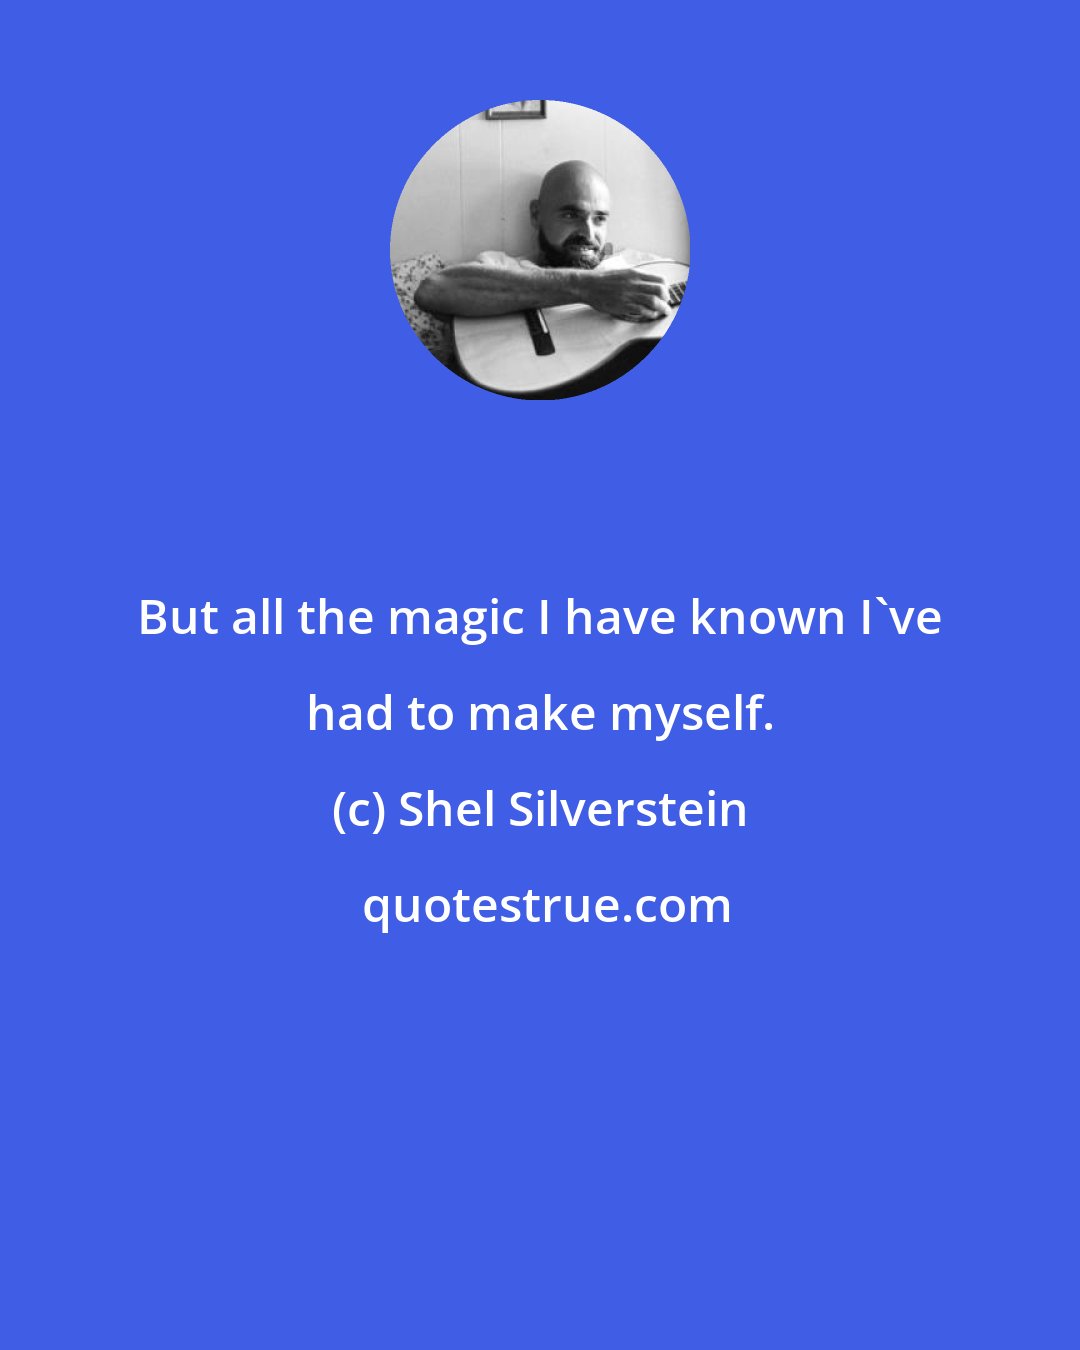 Shel Silverstein: But all the magic I have known I've had to make myself.